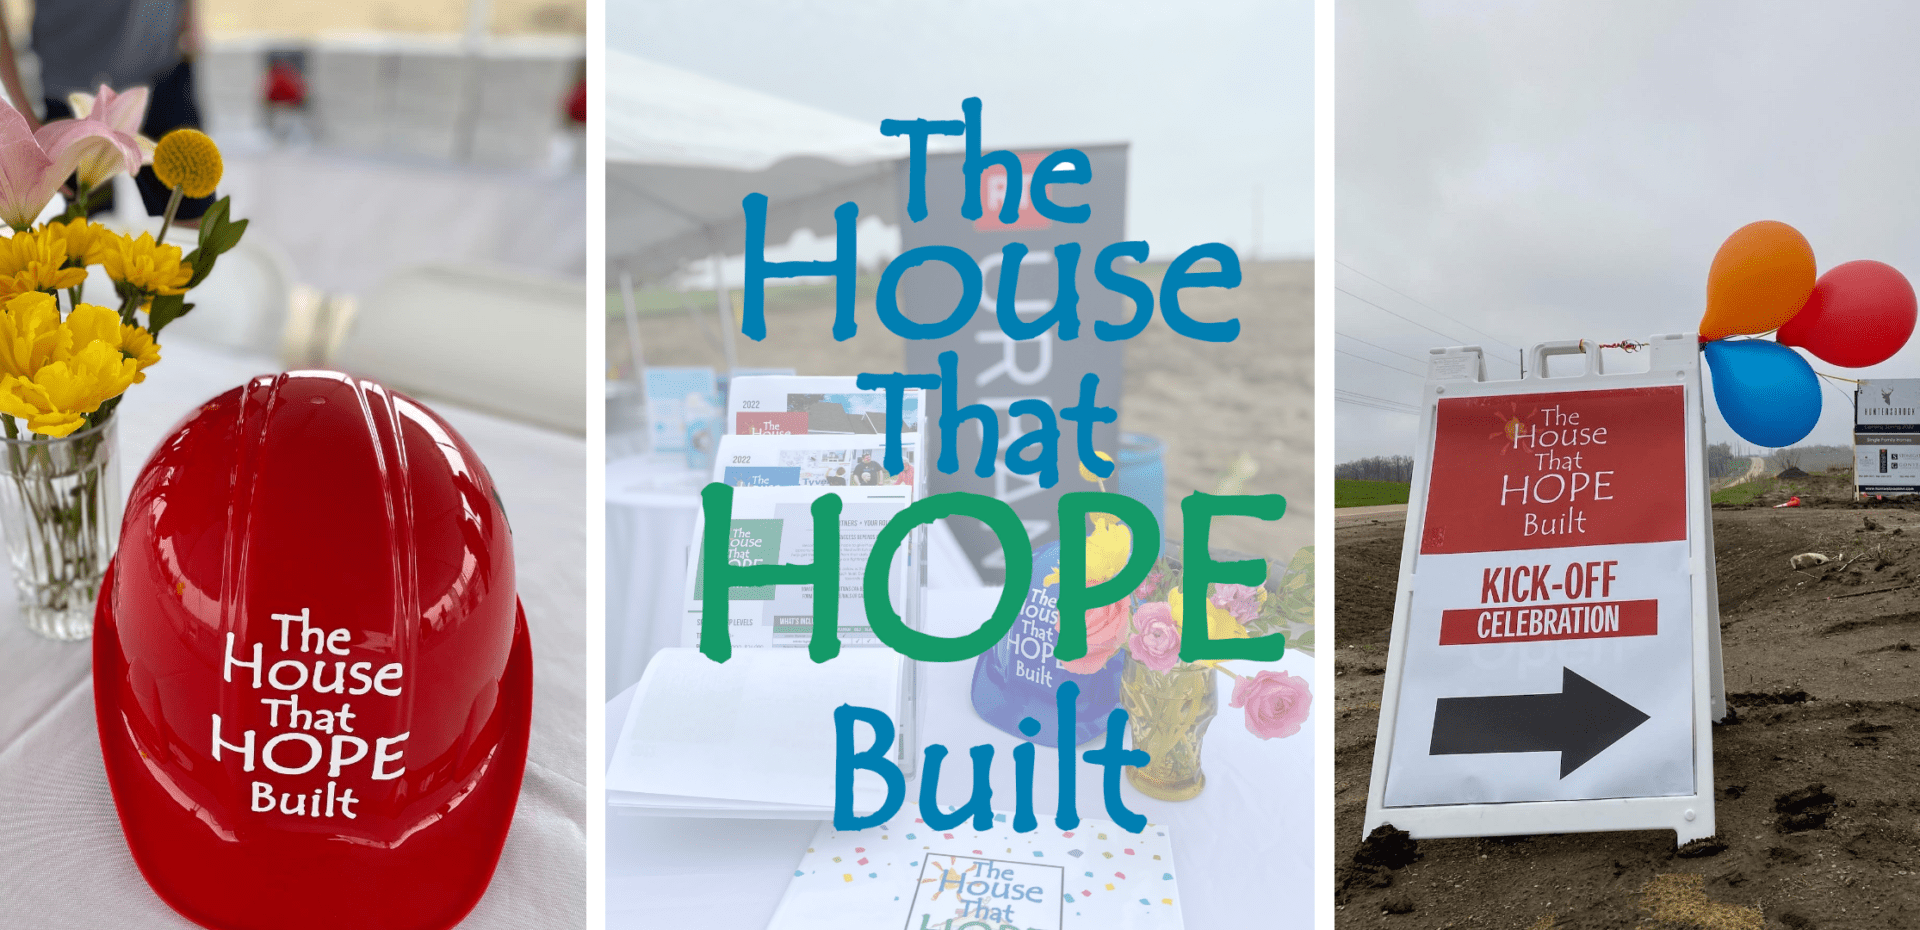 The House that Hope Built